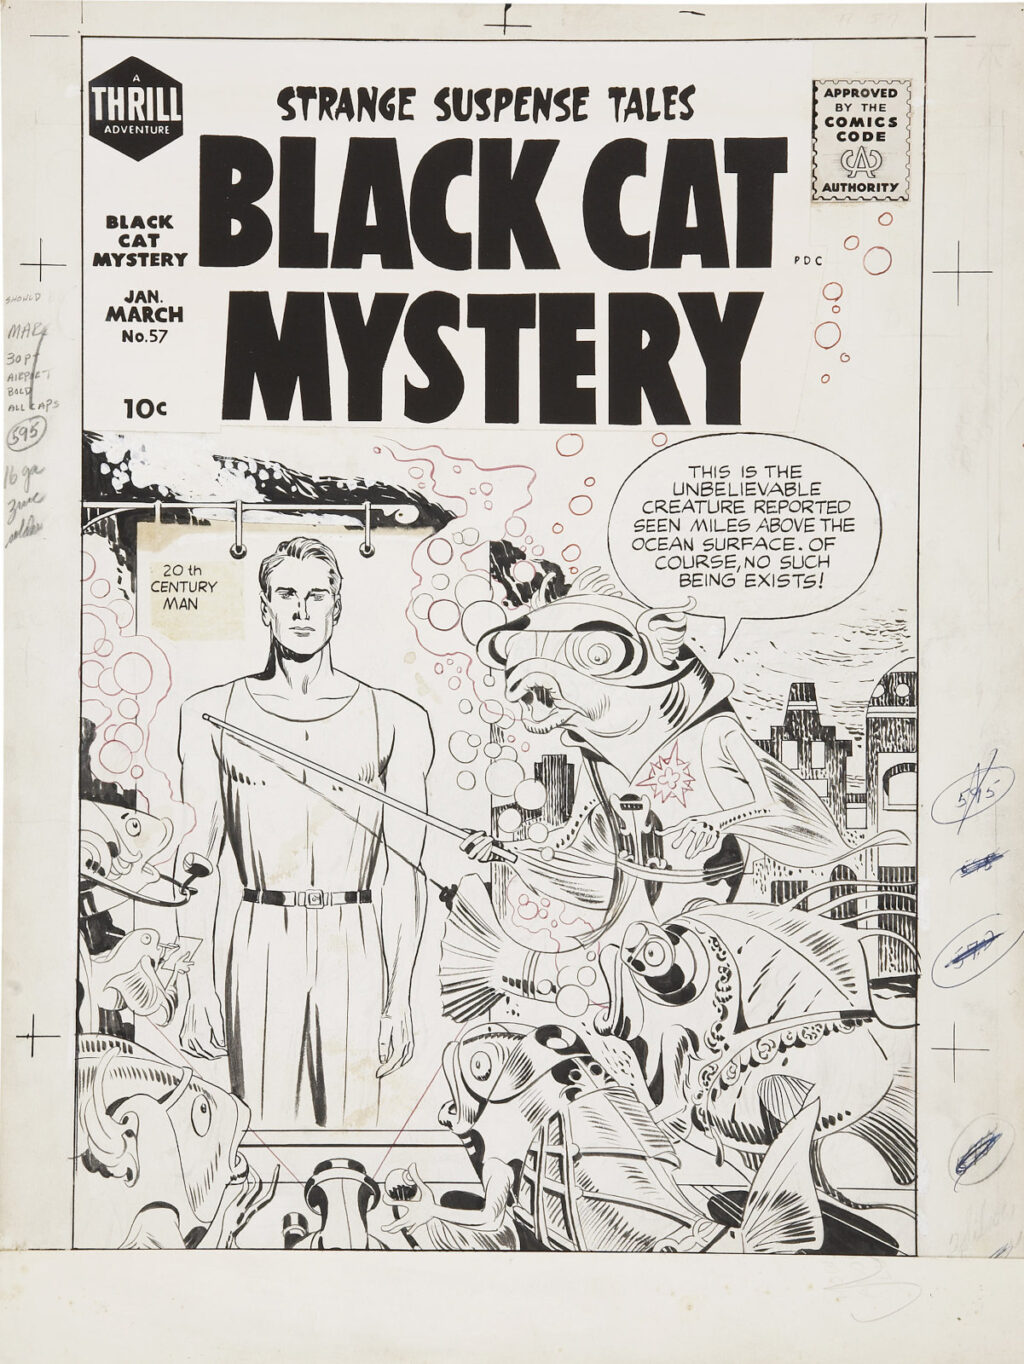 Black Cat Mystery Comics issue 57 cover by Jack Kirby